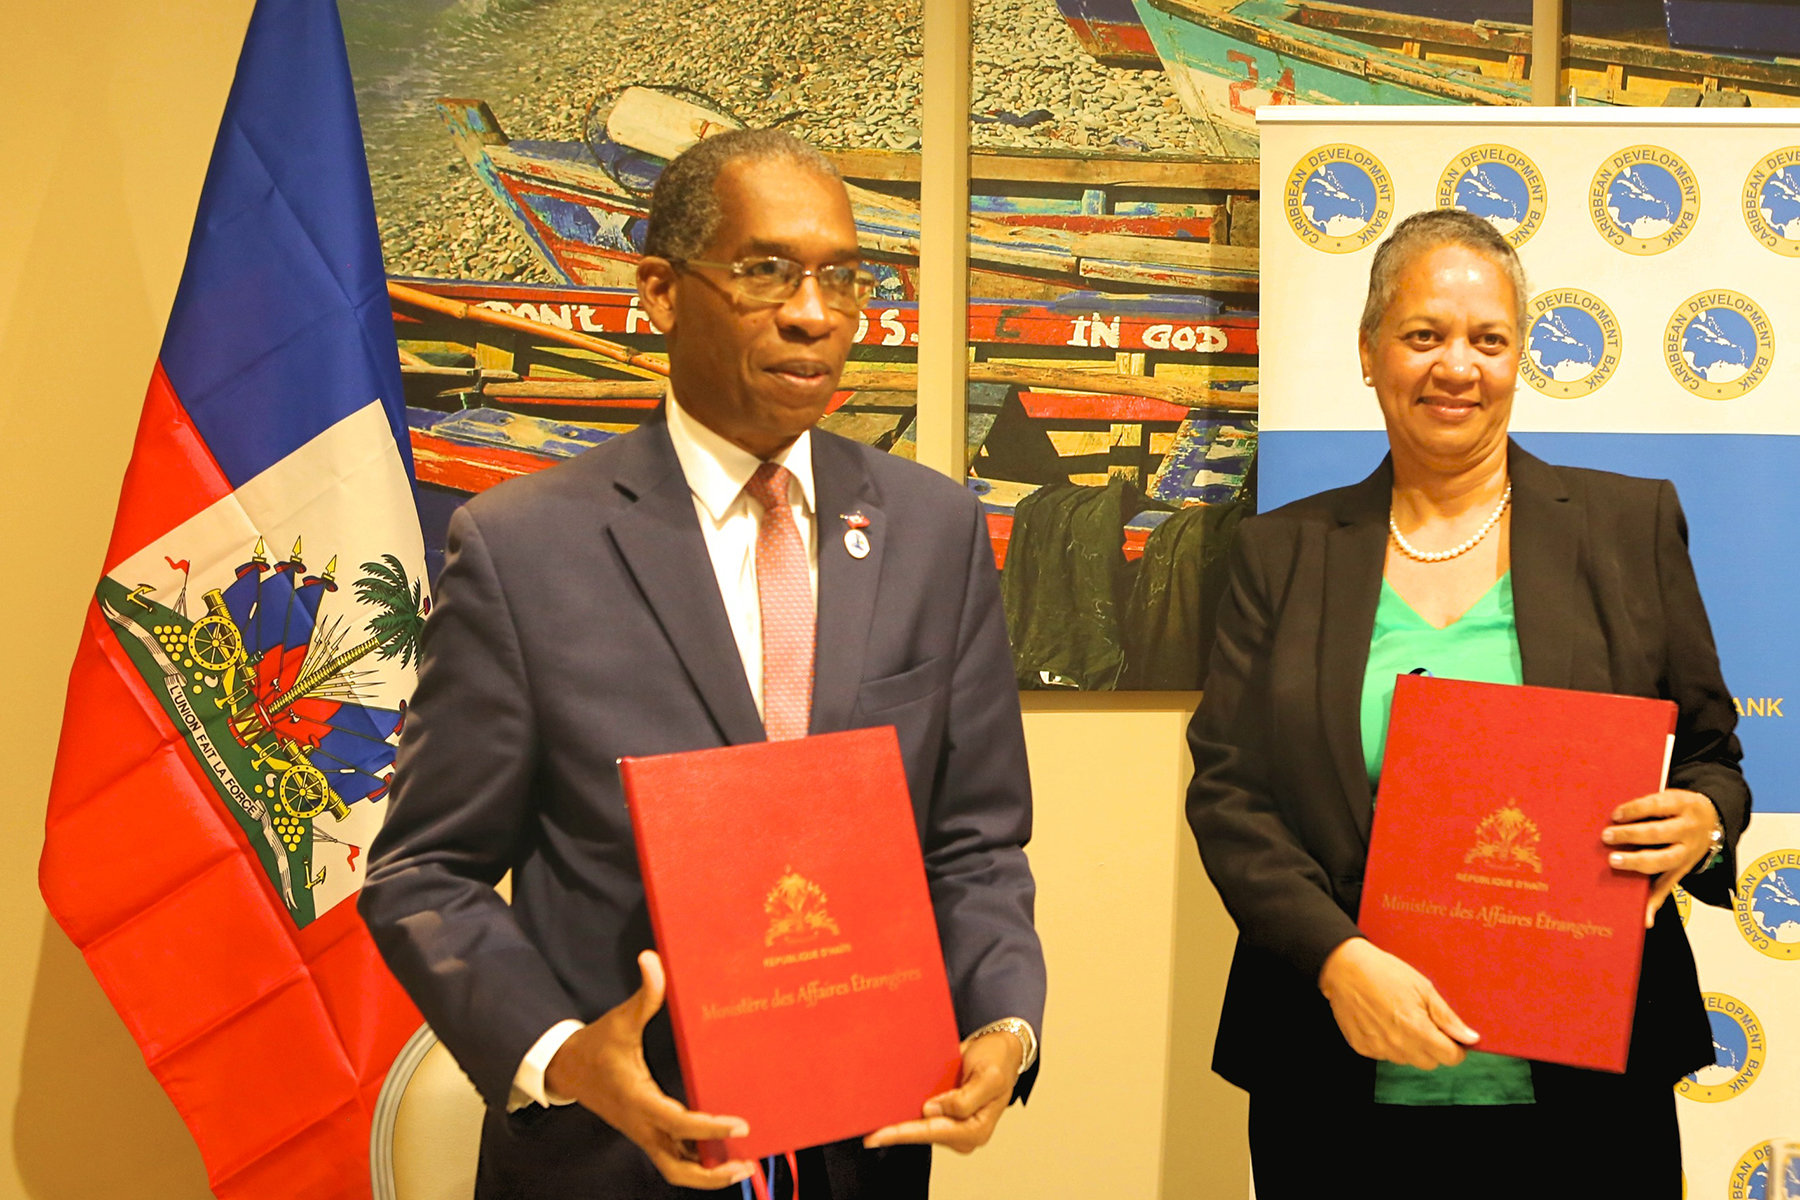 Haiti’s Minister of Foreign Affairs, His Excellency Antonio Rodrigue (left) and Vice-President (Operations), Caribbean Development Bank (CDB), Monica La Bennett (right), hold the signed country agreements after signing them on February 27, 2018. CDB will establish its first country office in the Republic of Haiti this year.